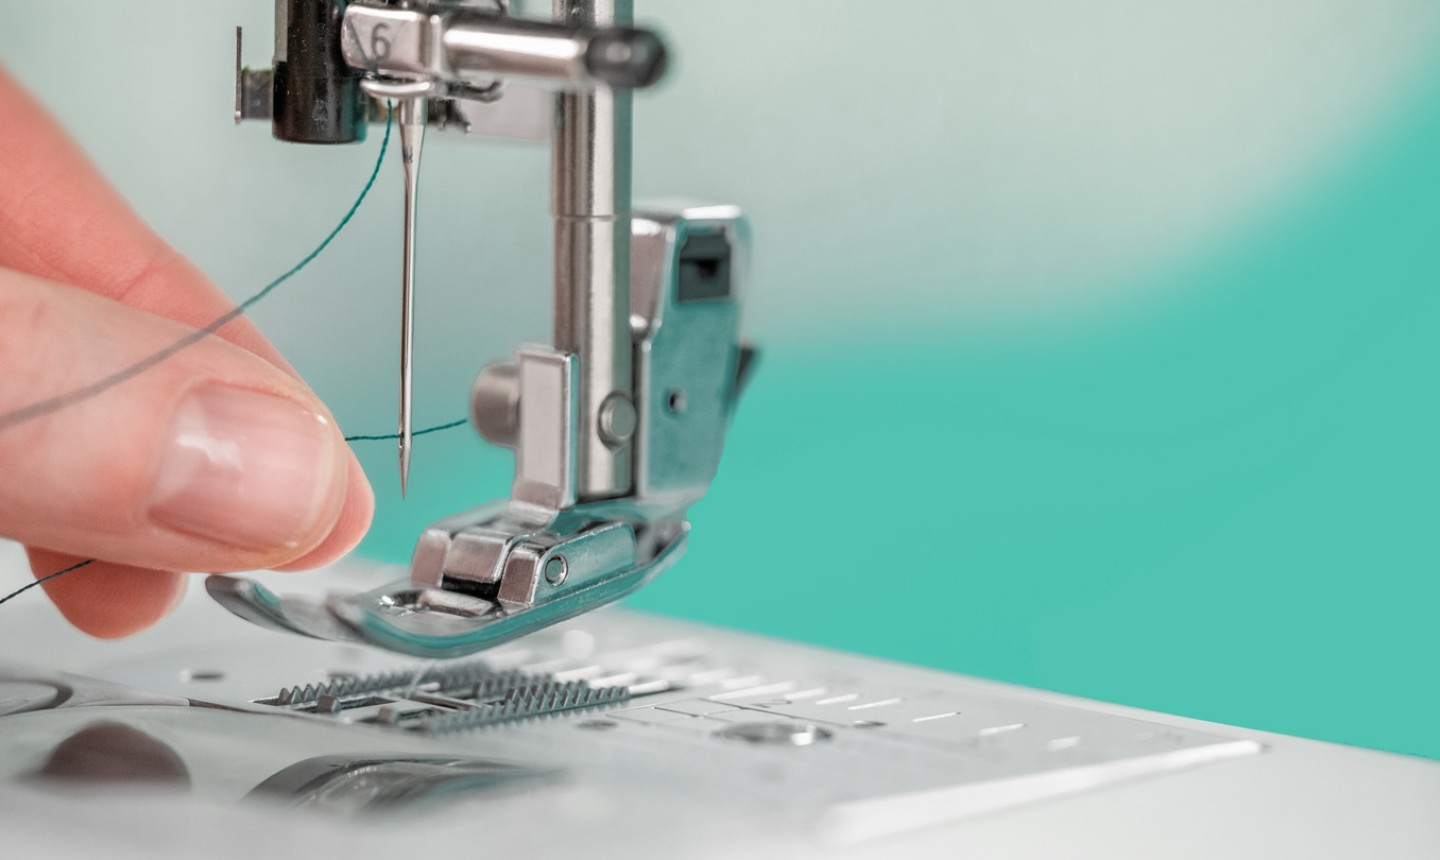 7 Simple Tips To Avoid Sewing Machine Jams And Other Tangles